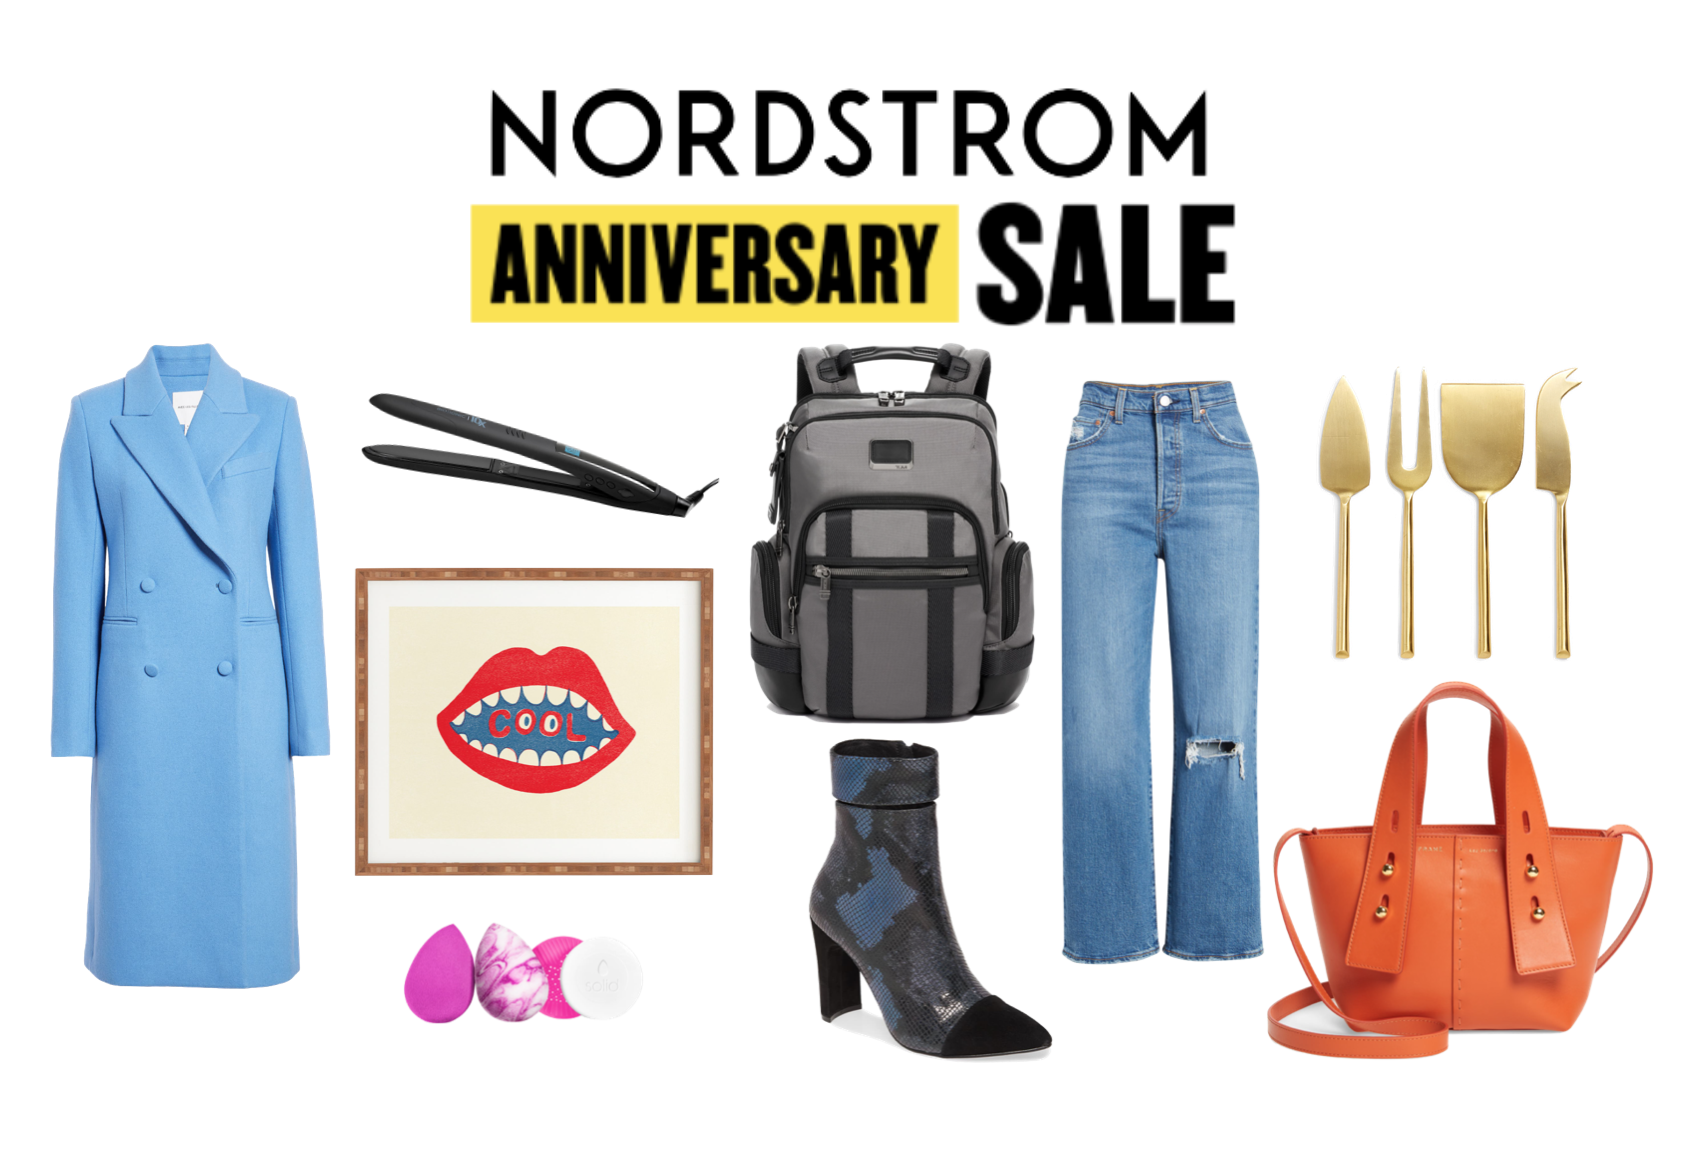 Nordstrom Anniversary Sale 2020 preview: When is it and what are